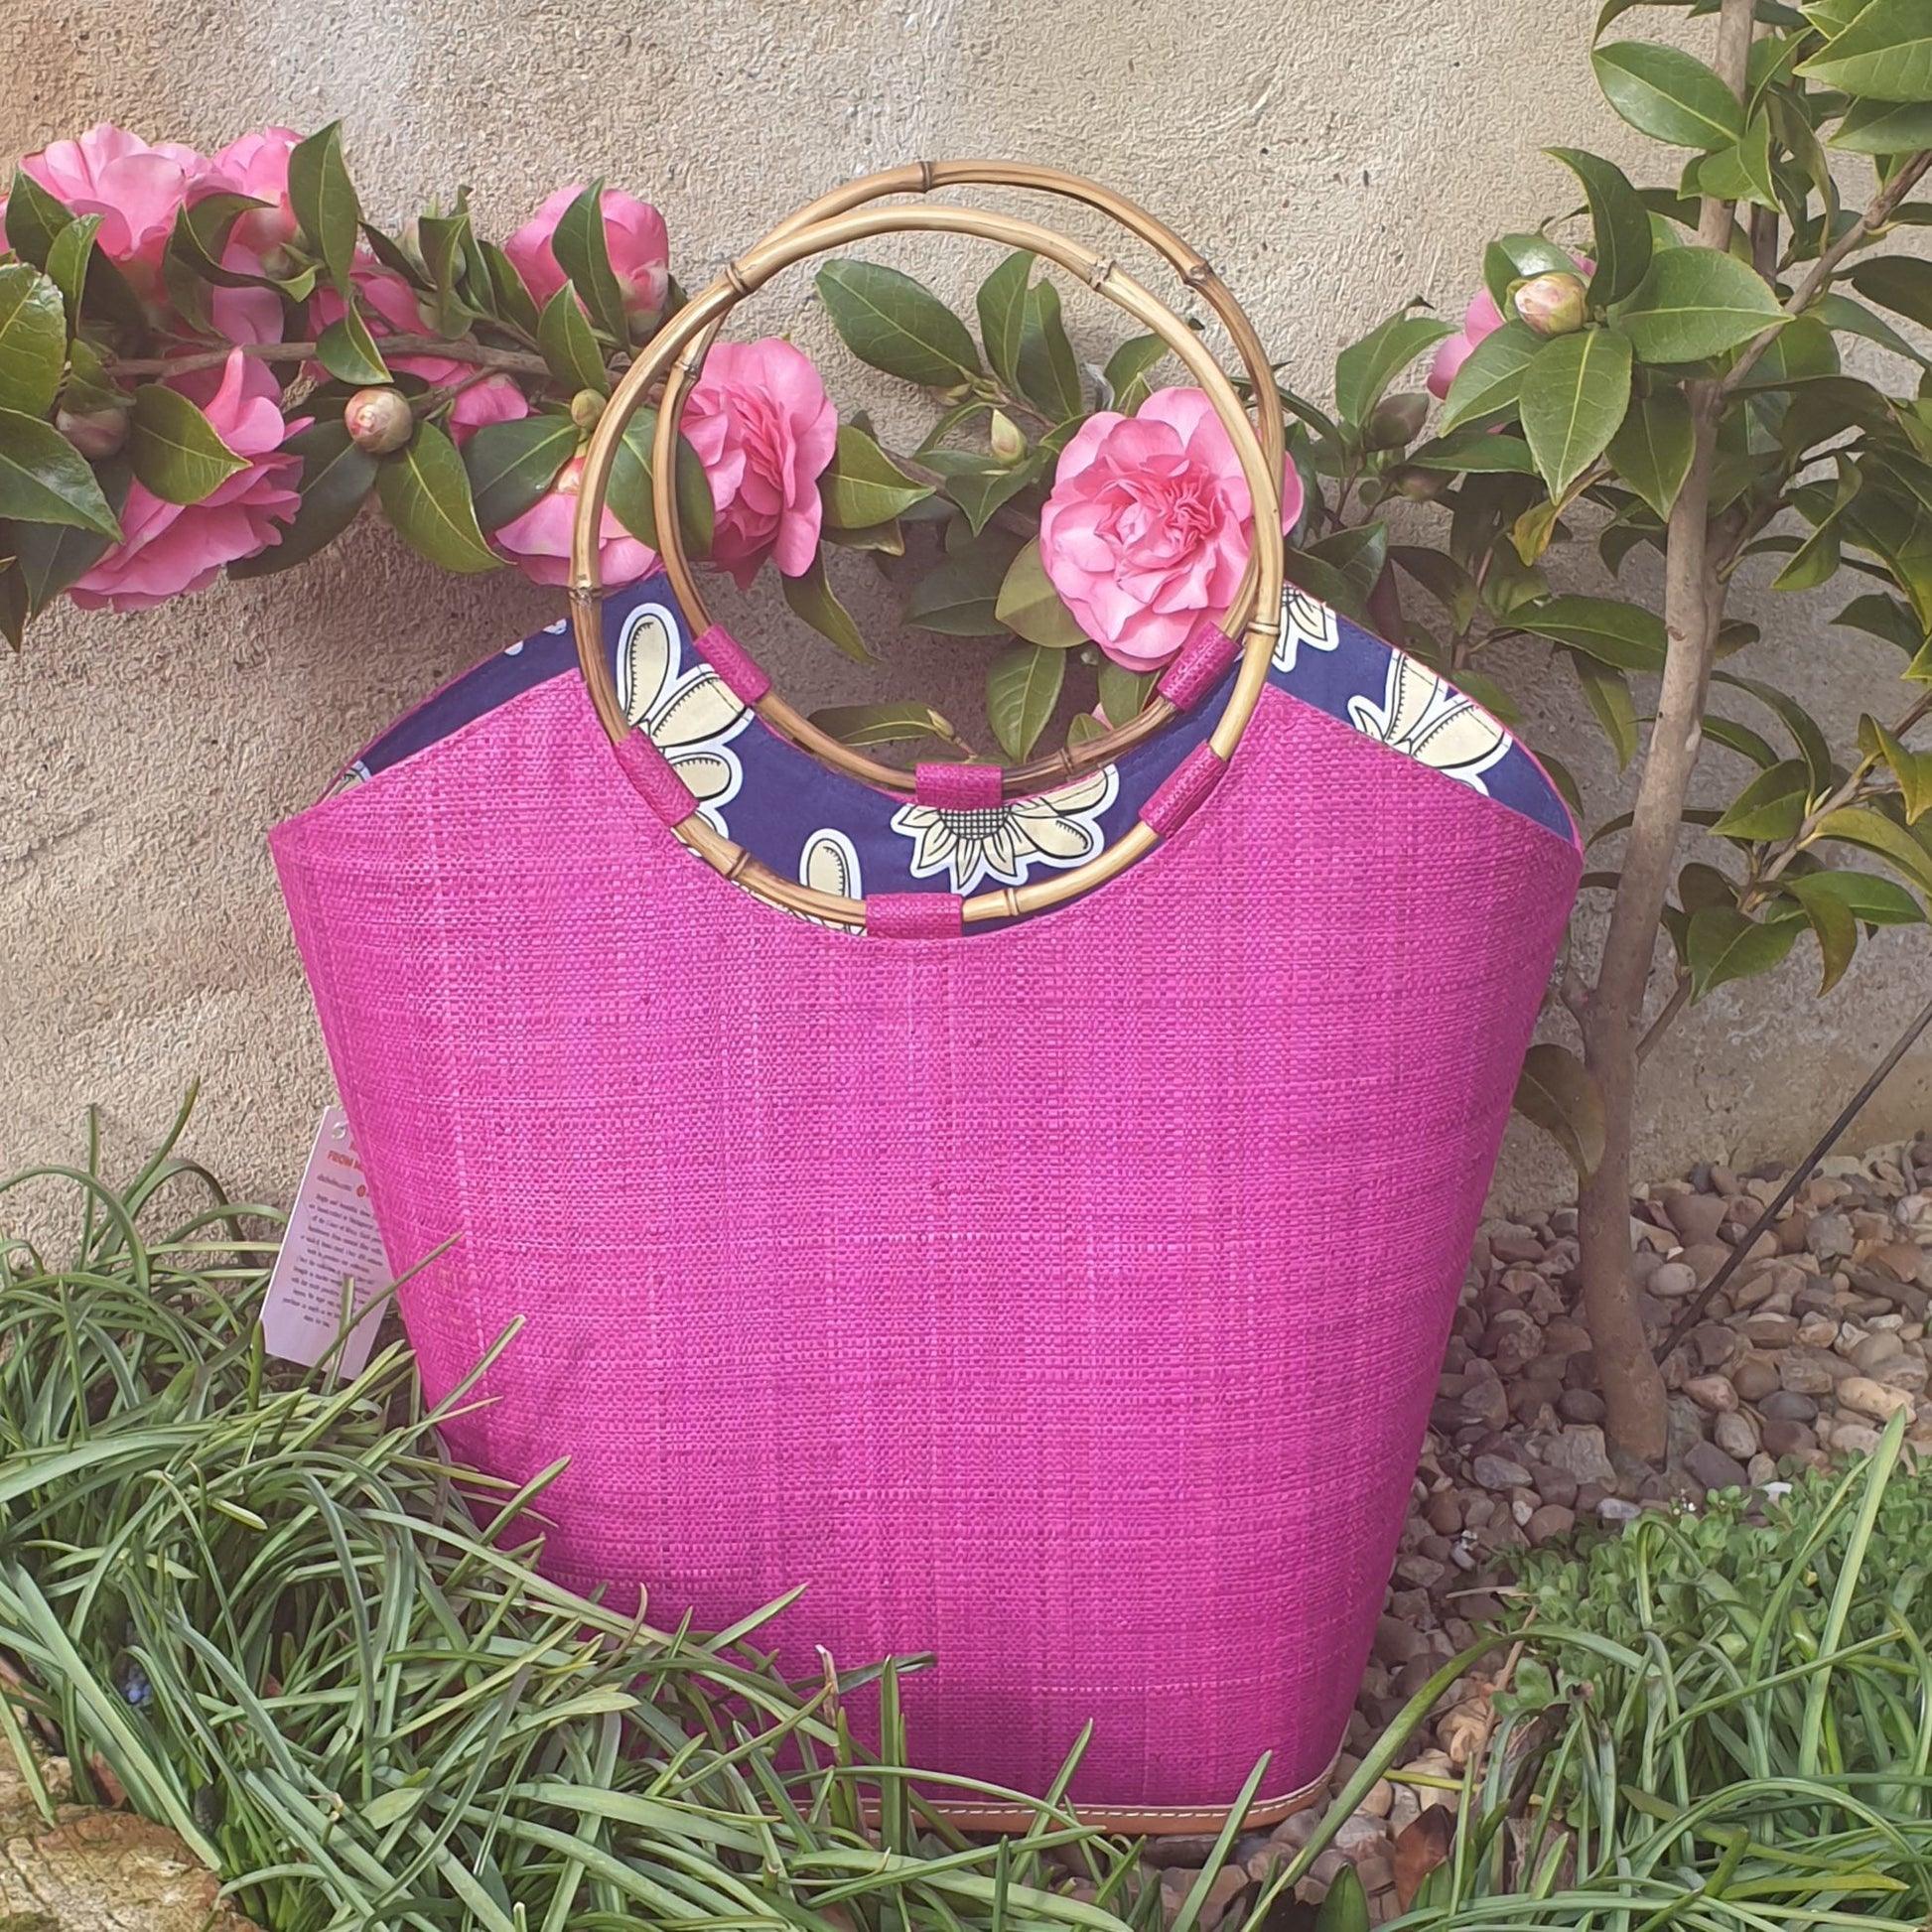 Photo of a finely woven raffia basket in shocking fuschia pink with a circular rigid bamboo handle